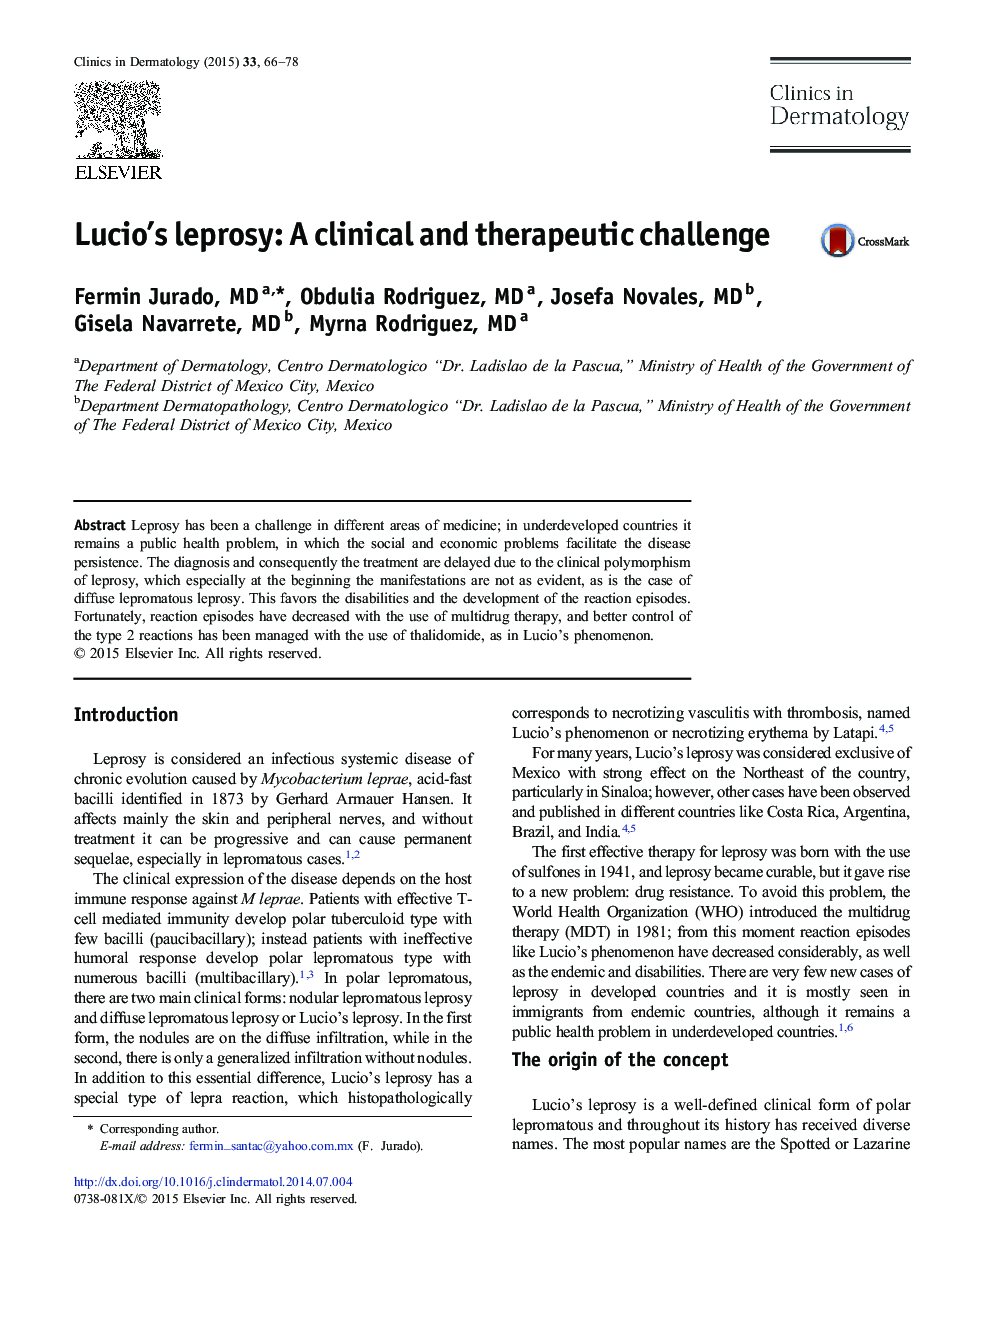 Lucio’s leprosy: A clinical and therapeutic challenge